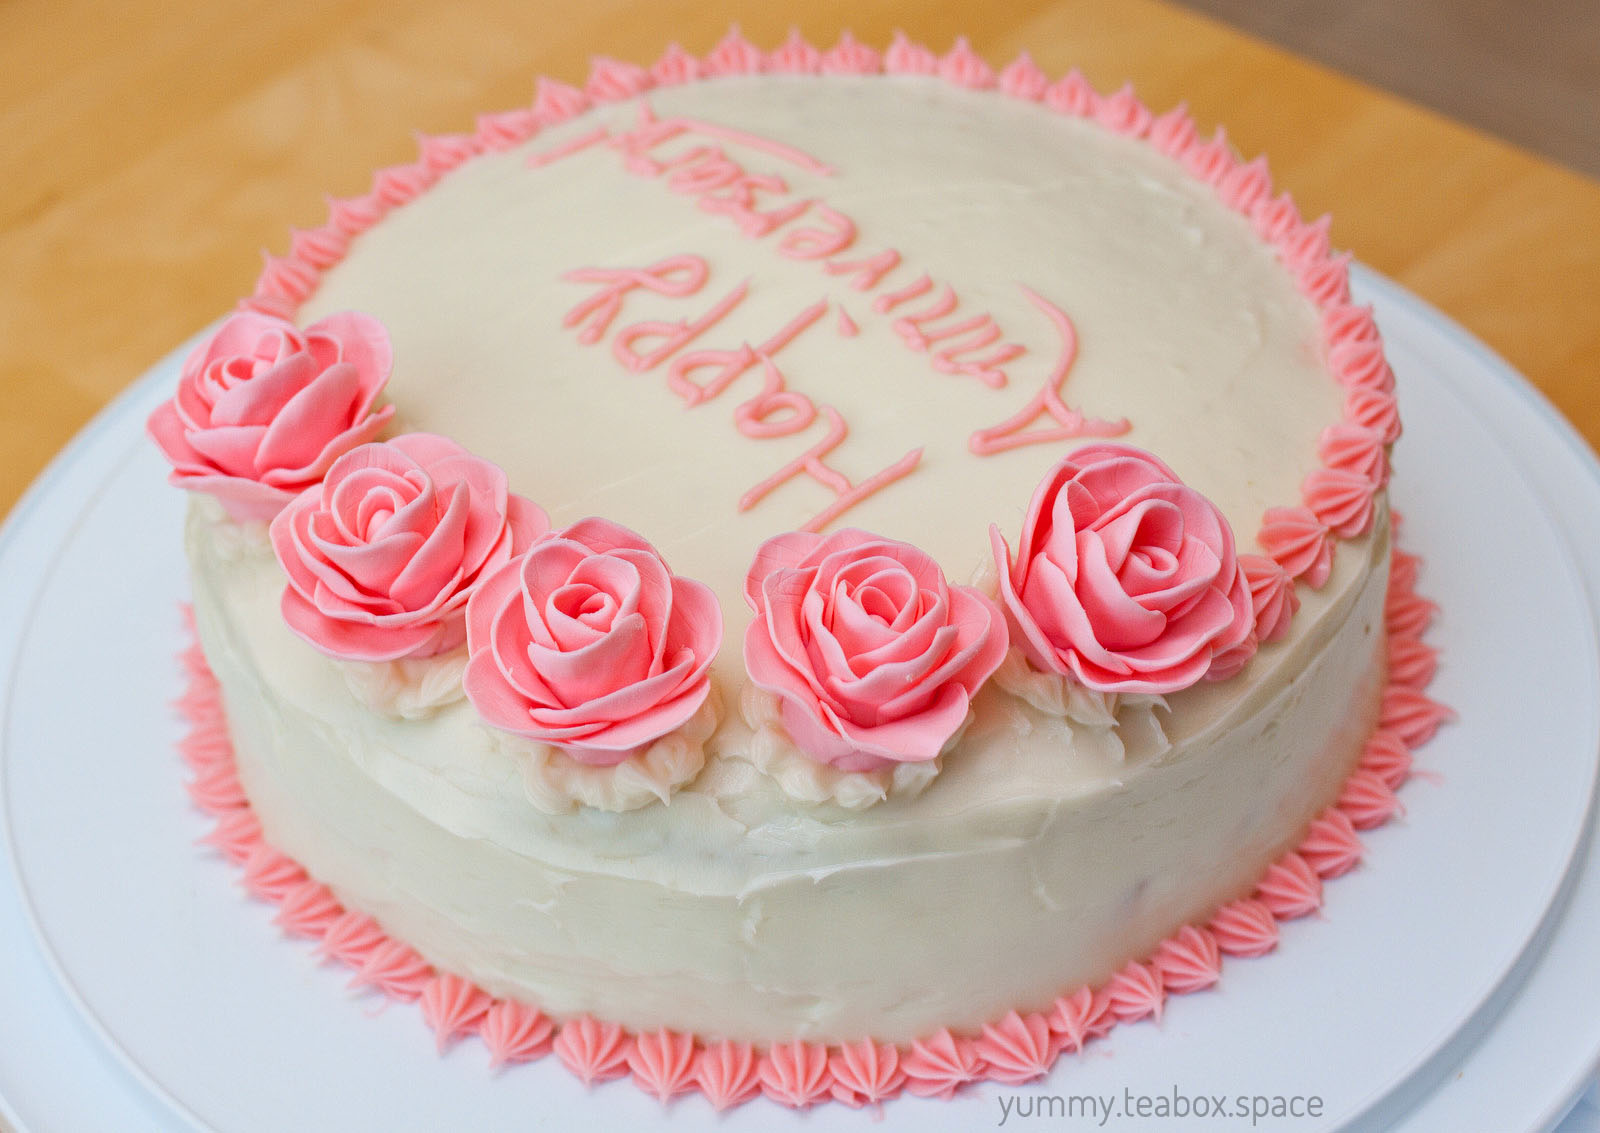 Closer view of five pink roses on a round white cake.